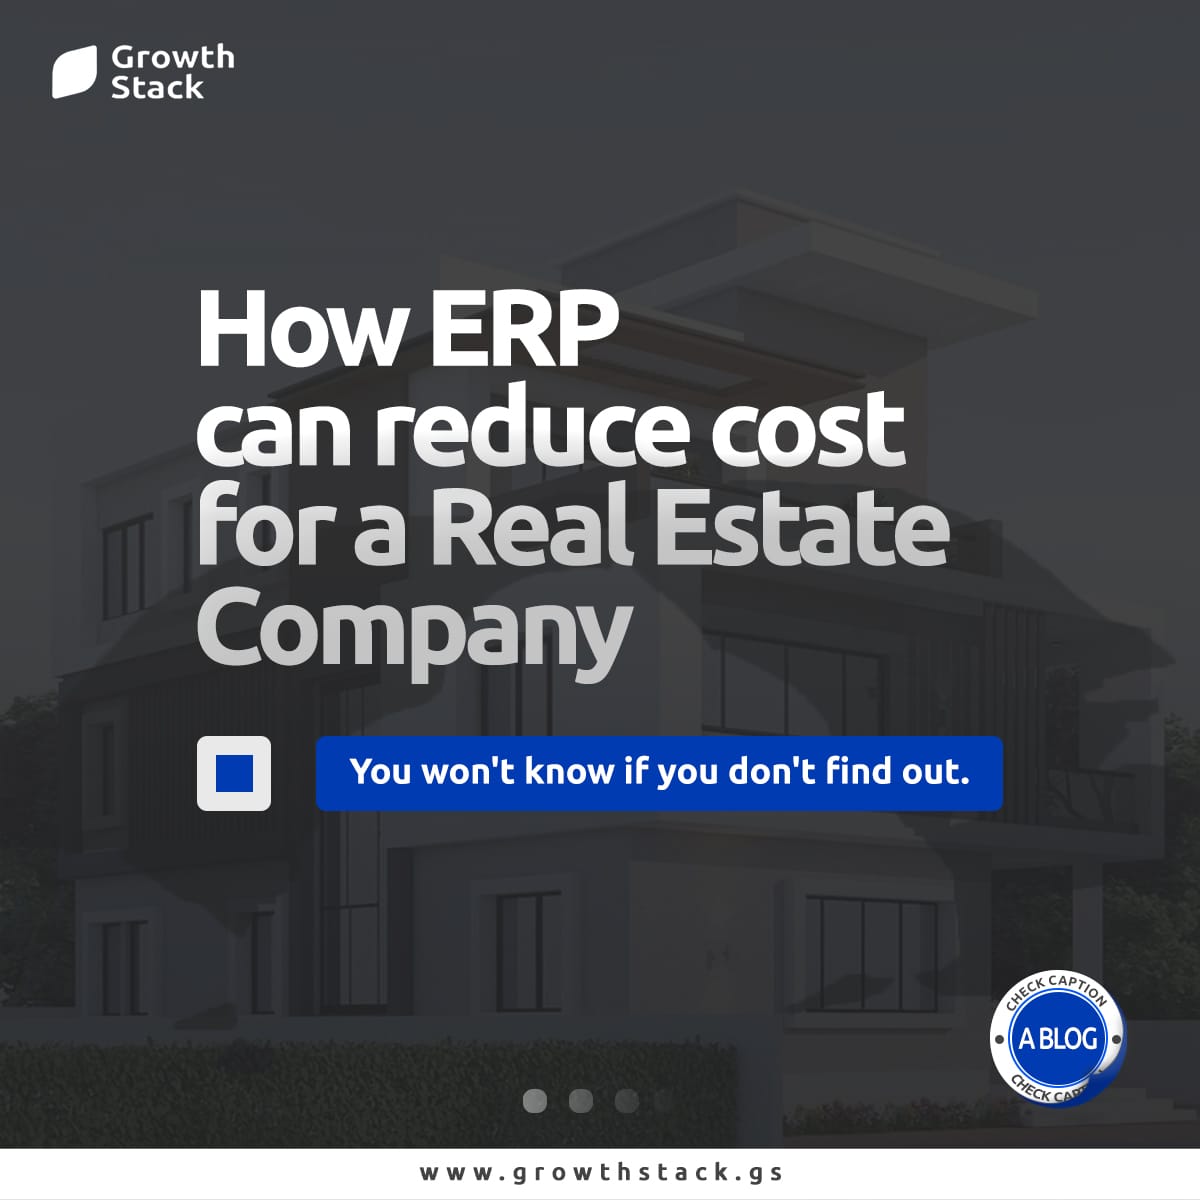 how erp reduce cost for real estate company